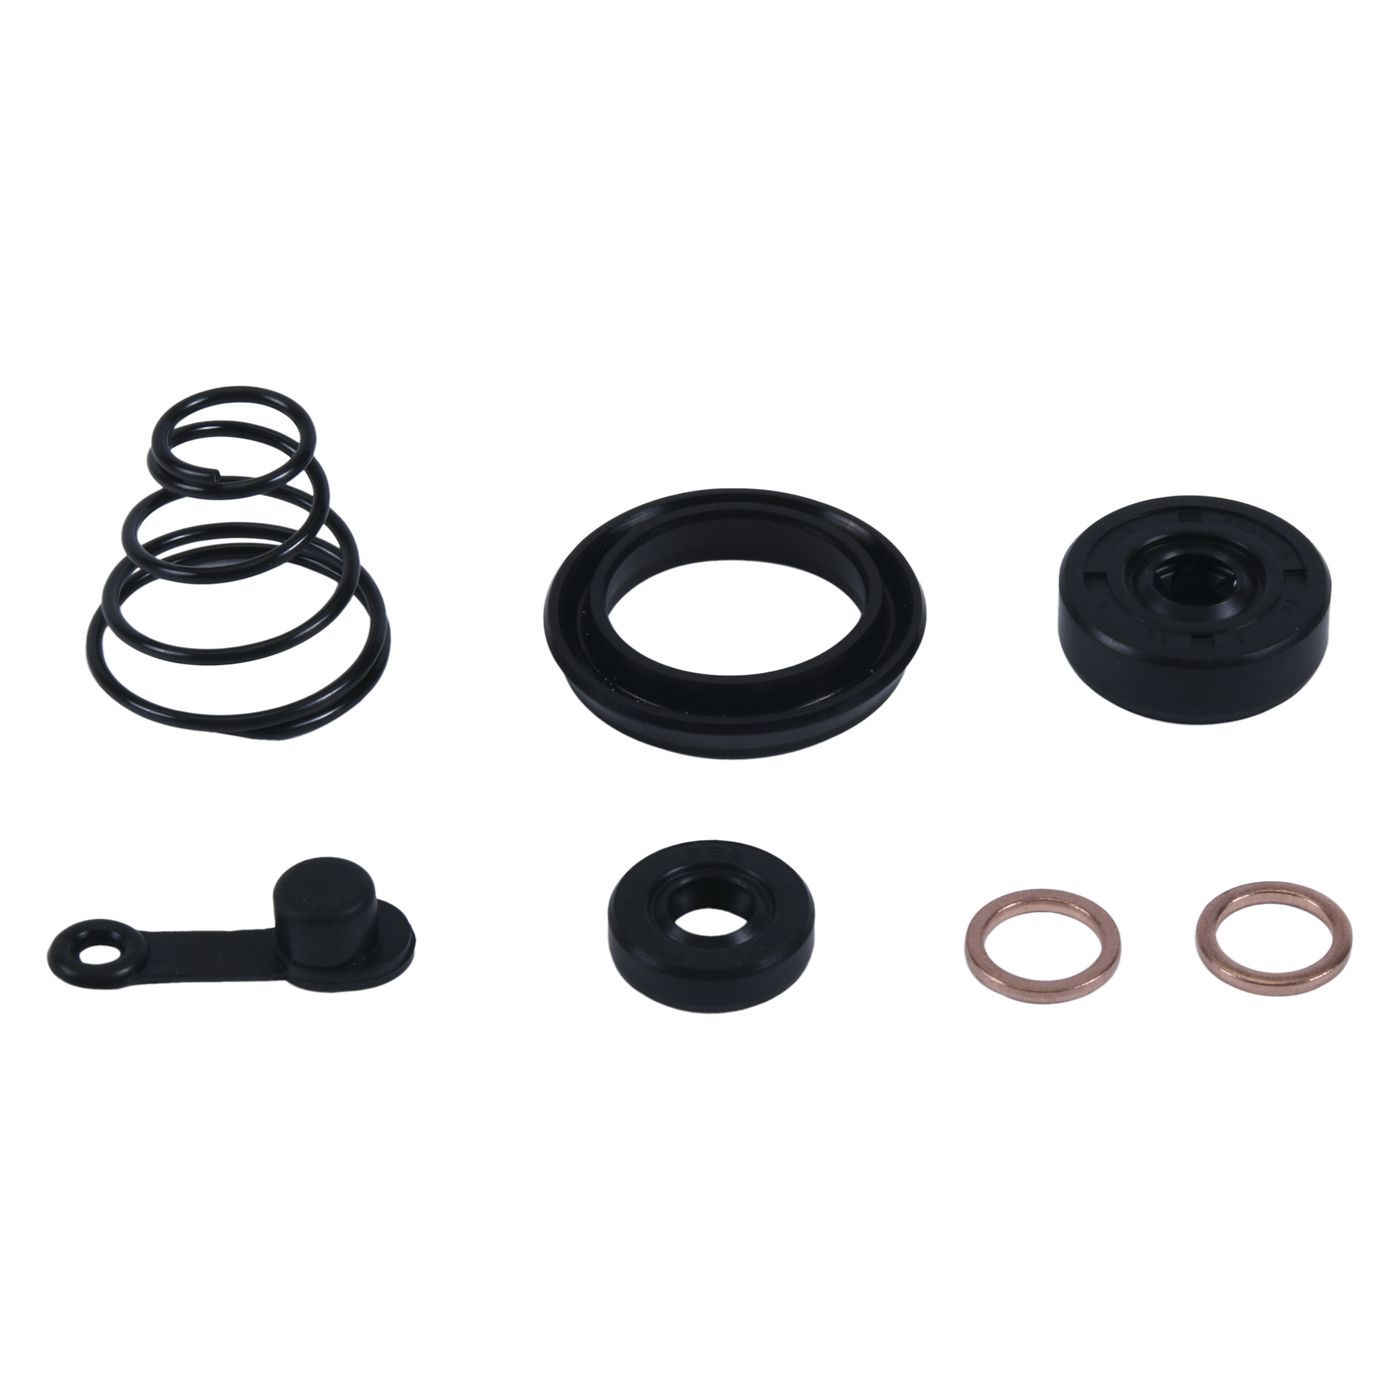 Wrp Clutch Slave Cylinder Kits - WRP186033 image